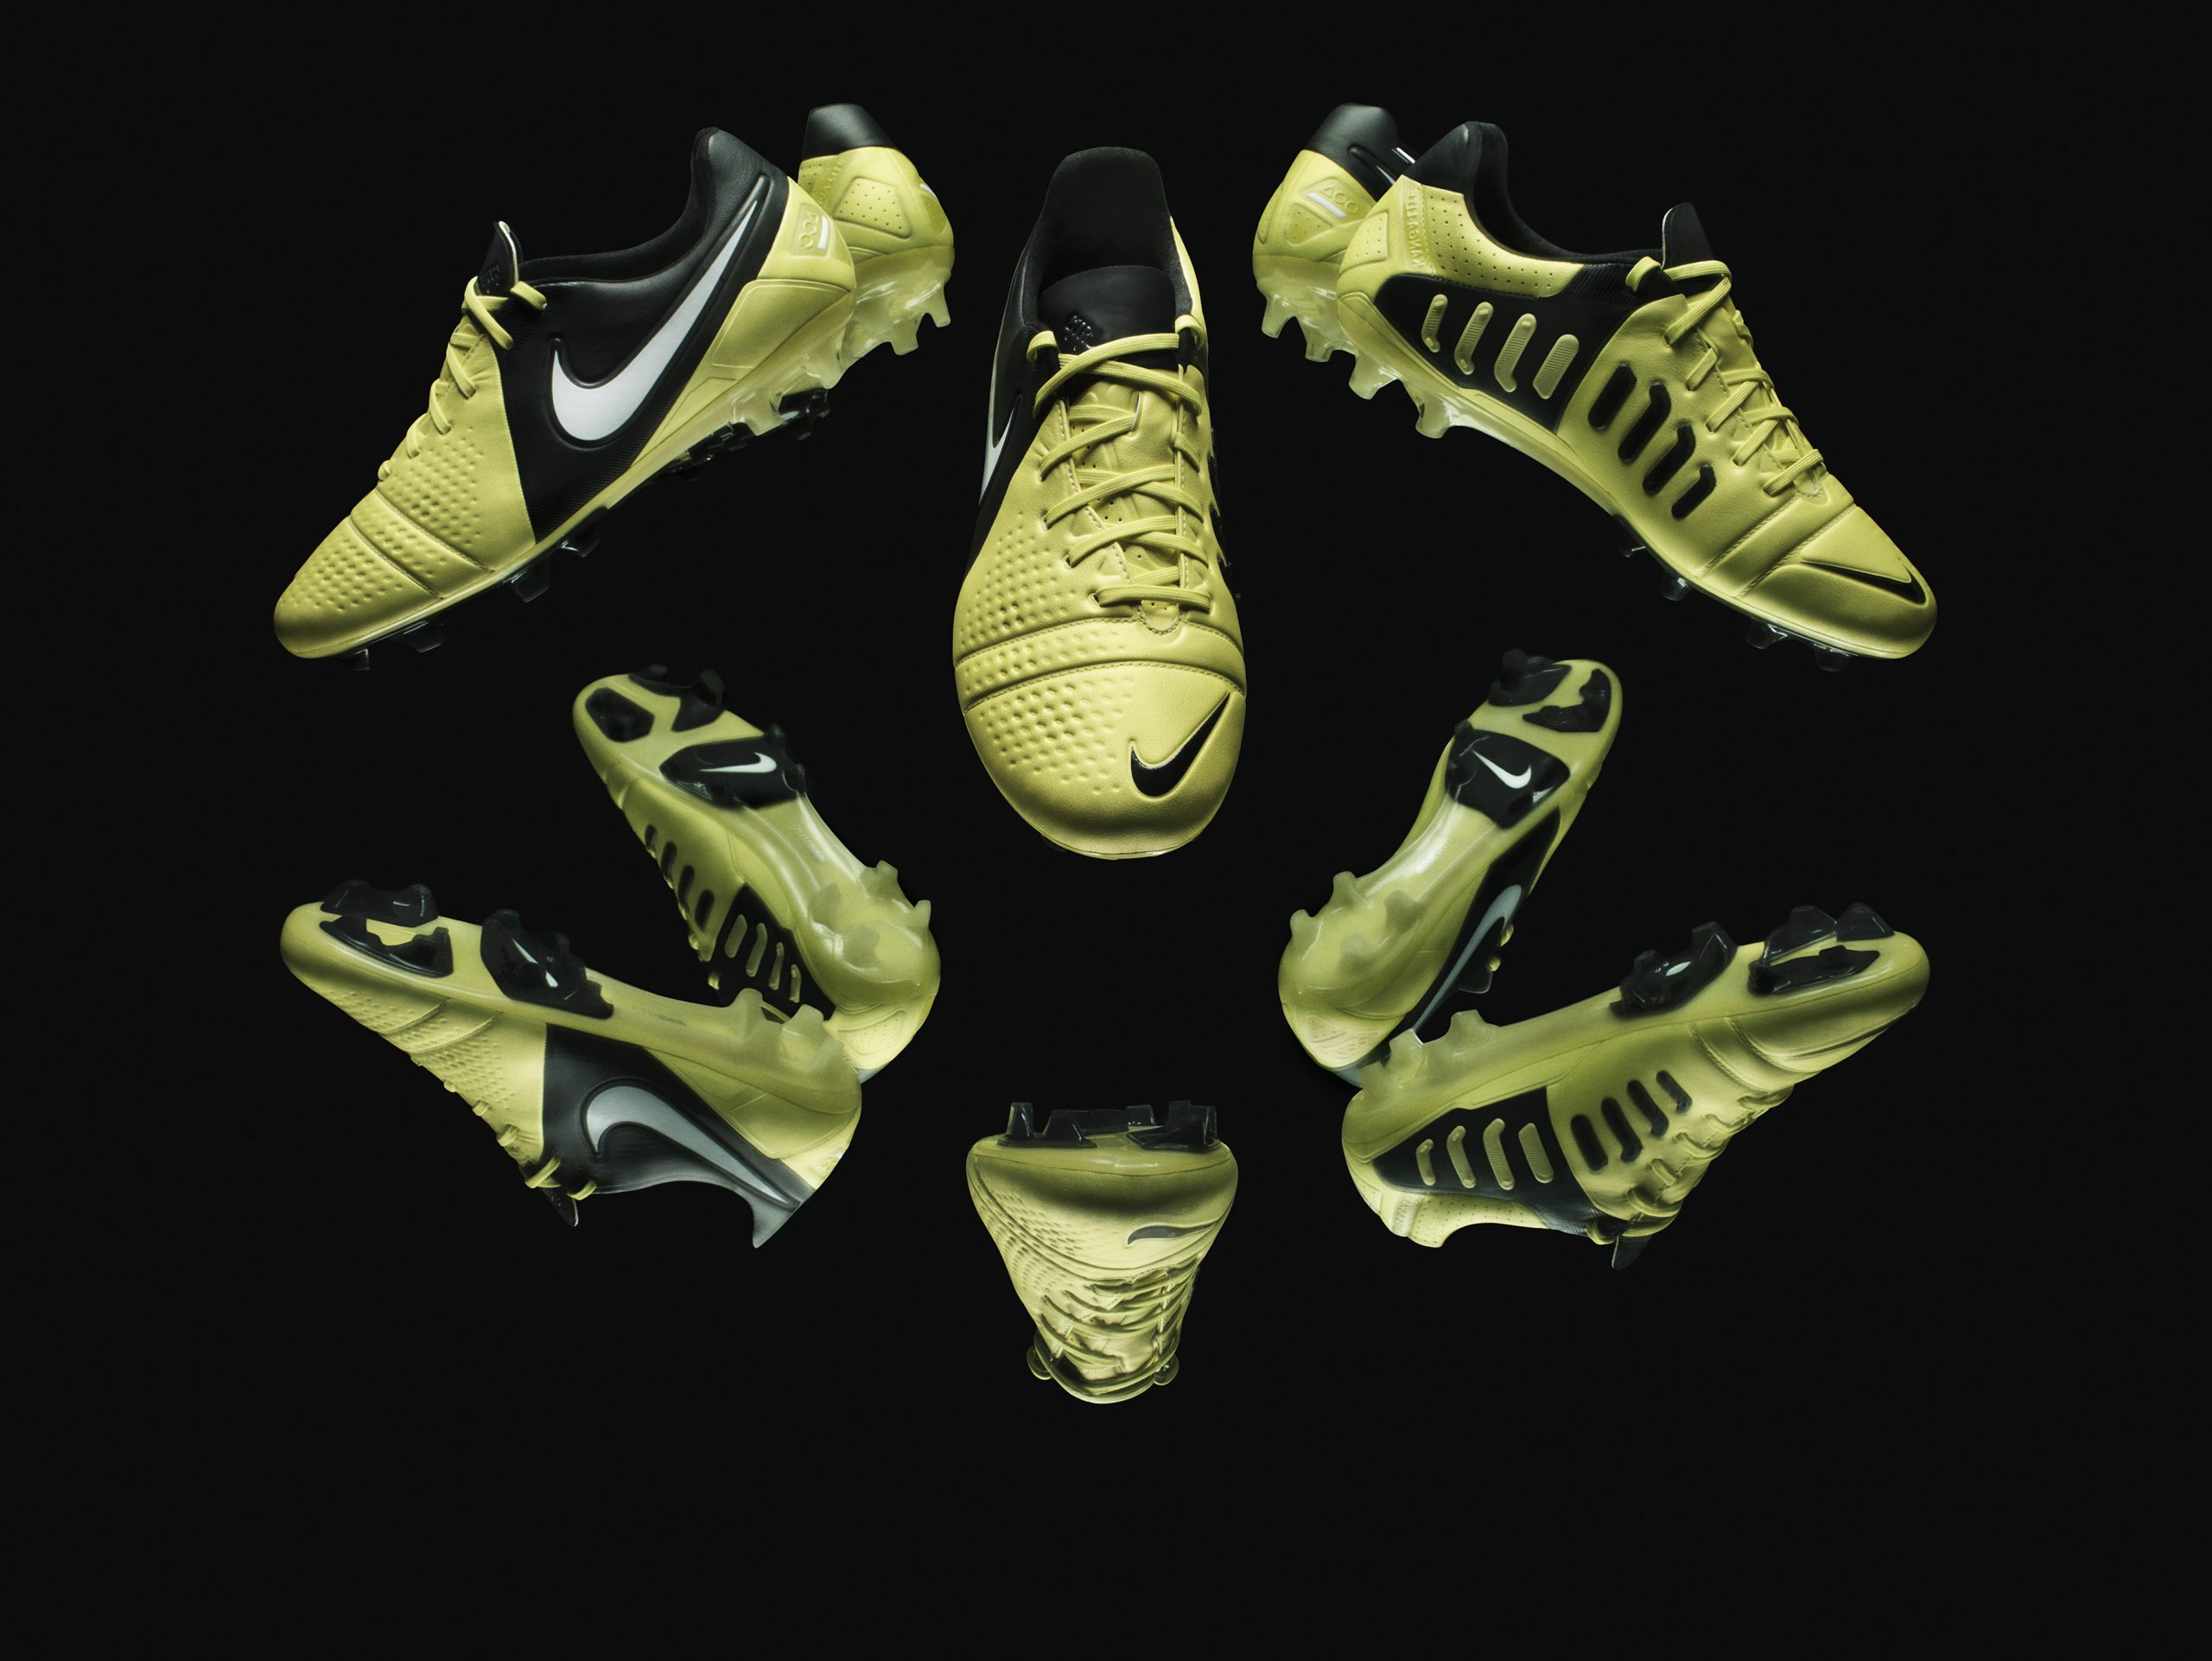 Best Football Boots of 2011